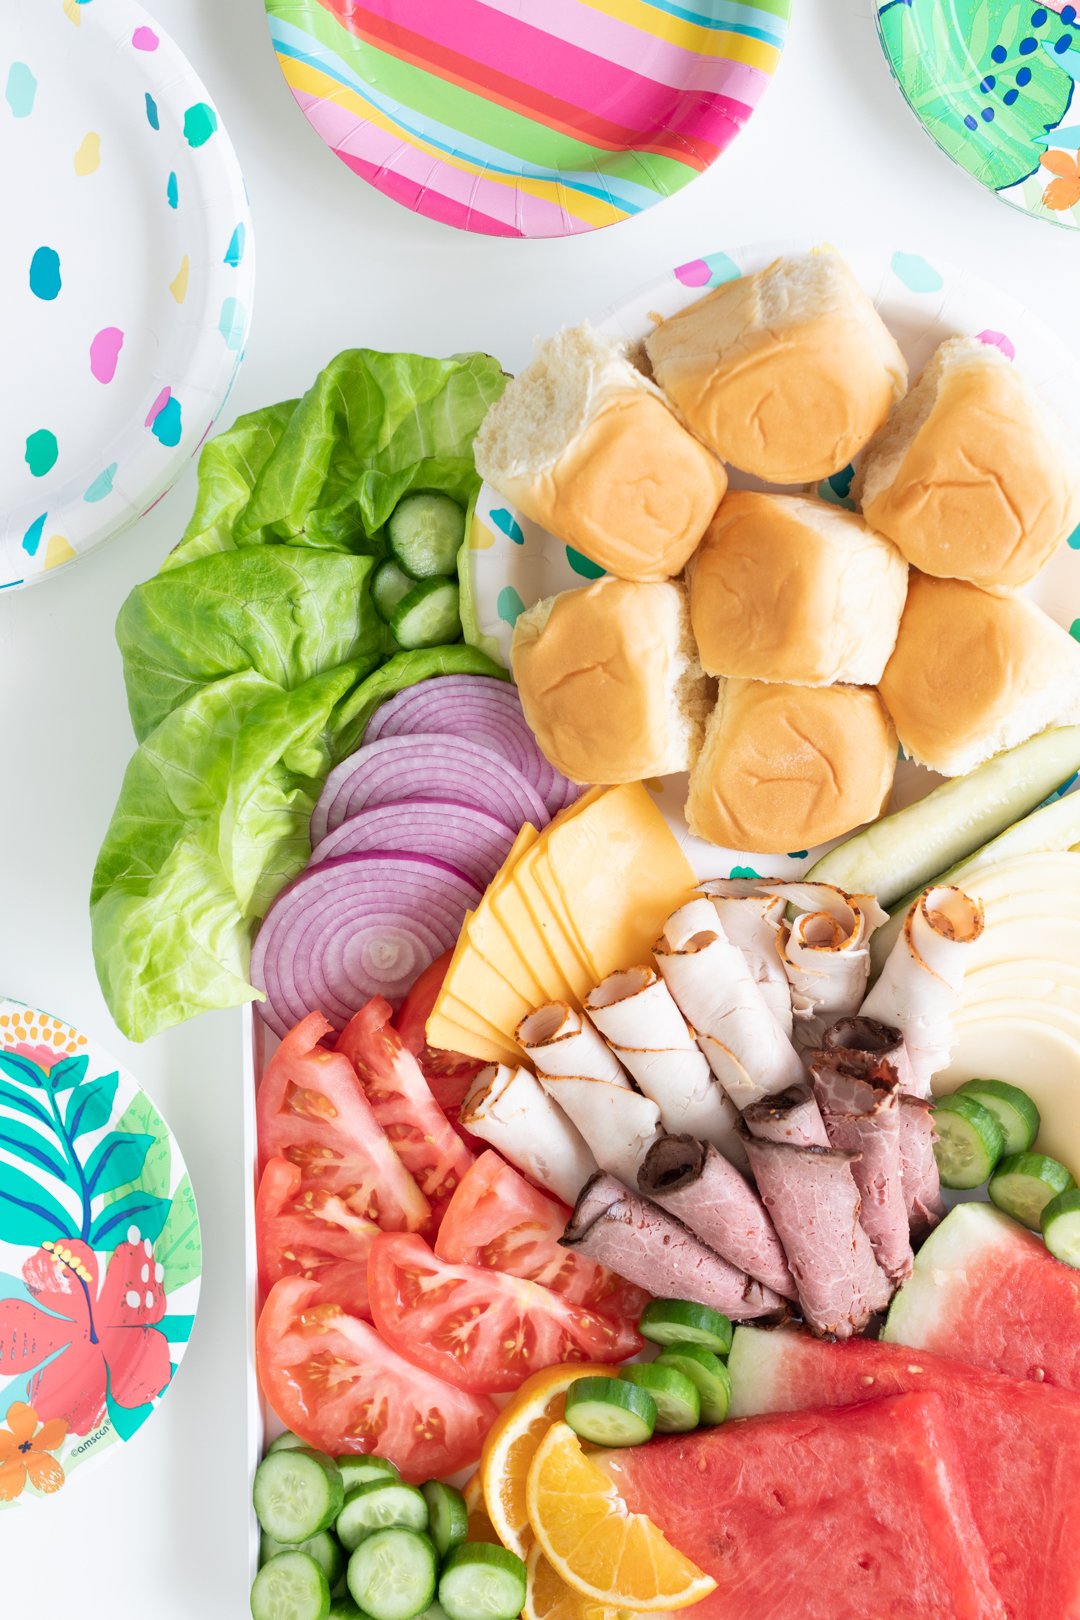 styled sandwich charcuterie board with lettuce, tomato slices, lunch meats, cheeses and fruits with a variety of colorful paper plates surrounding it.